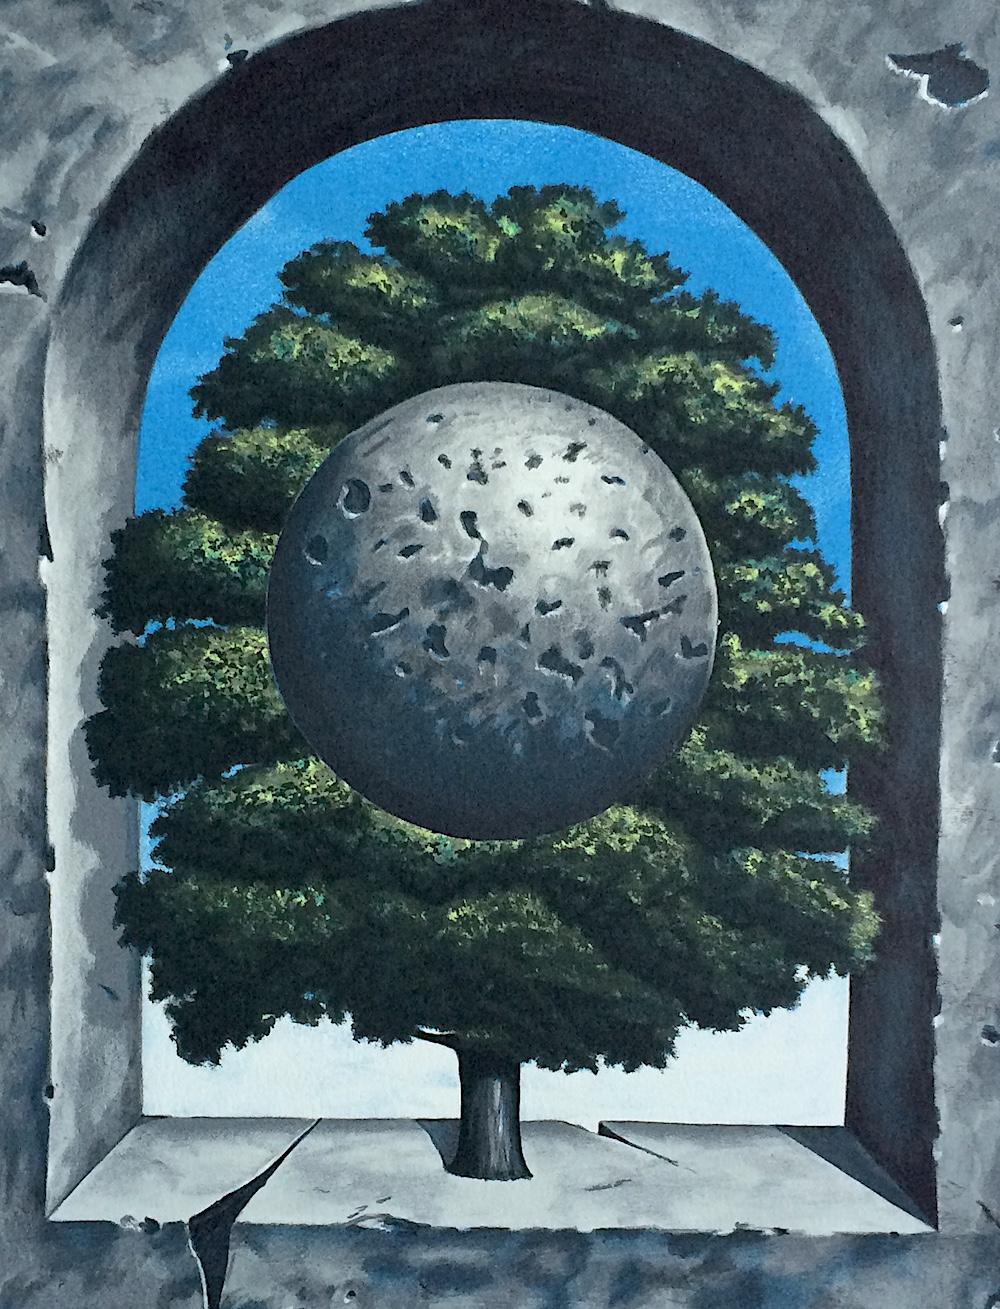 A POINT OF HONOR Hand Drawn Lithograph, Surrealist Tree, Blue Sky, Concrete Arch - Print by Michael Hasted